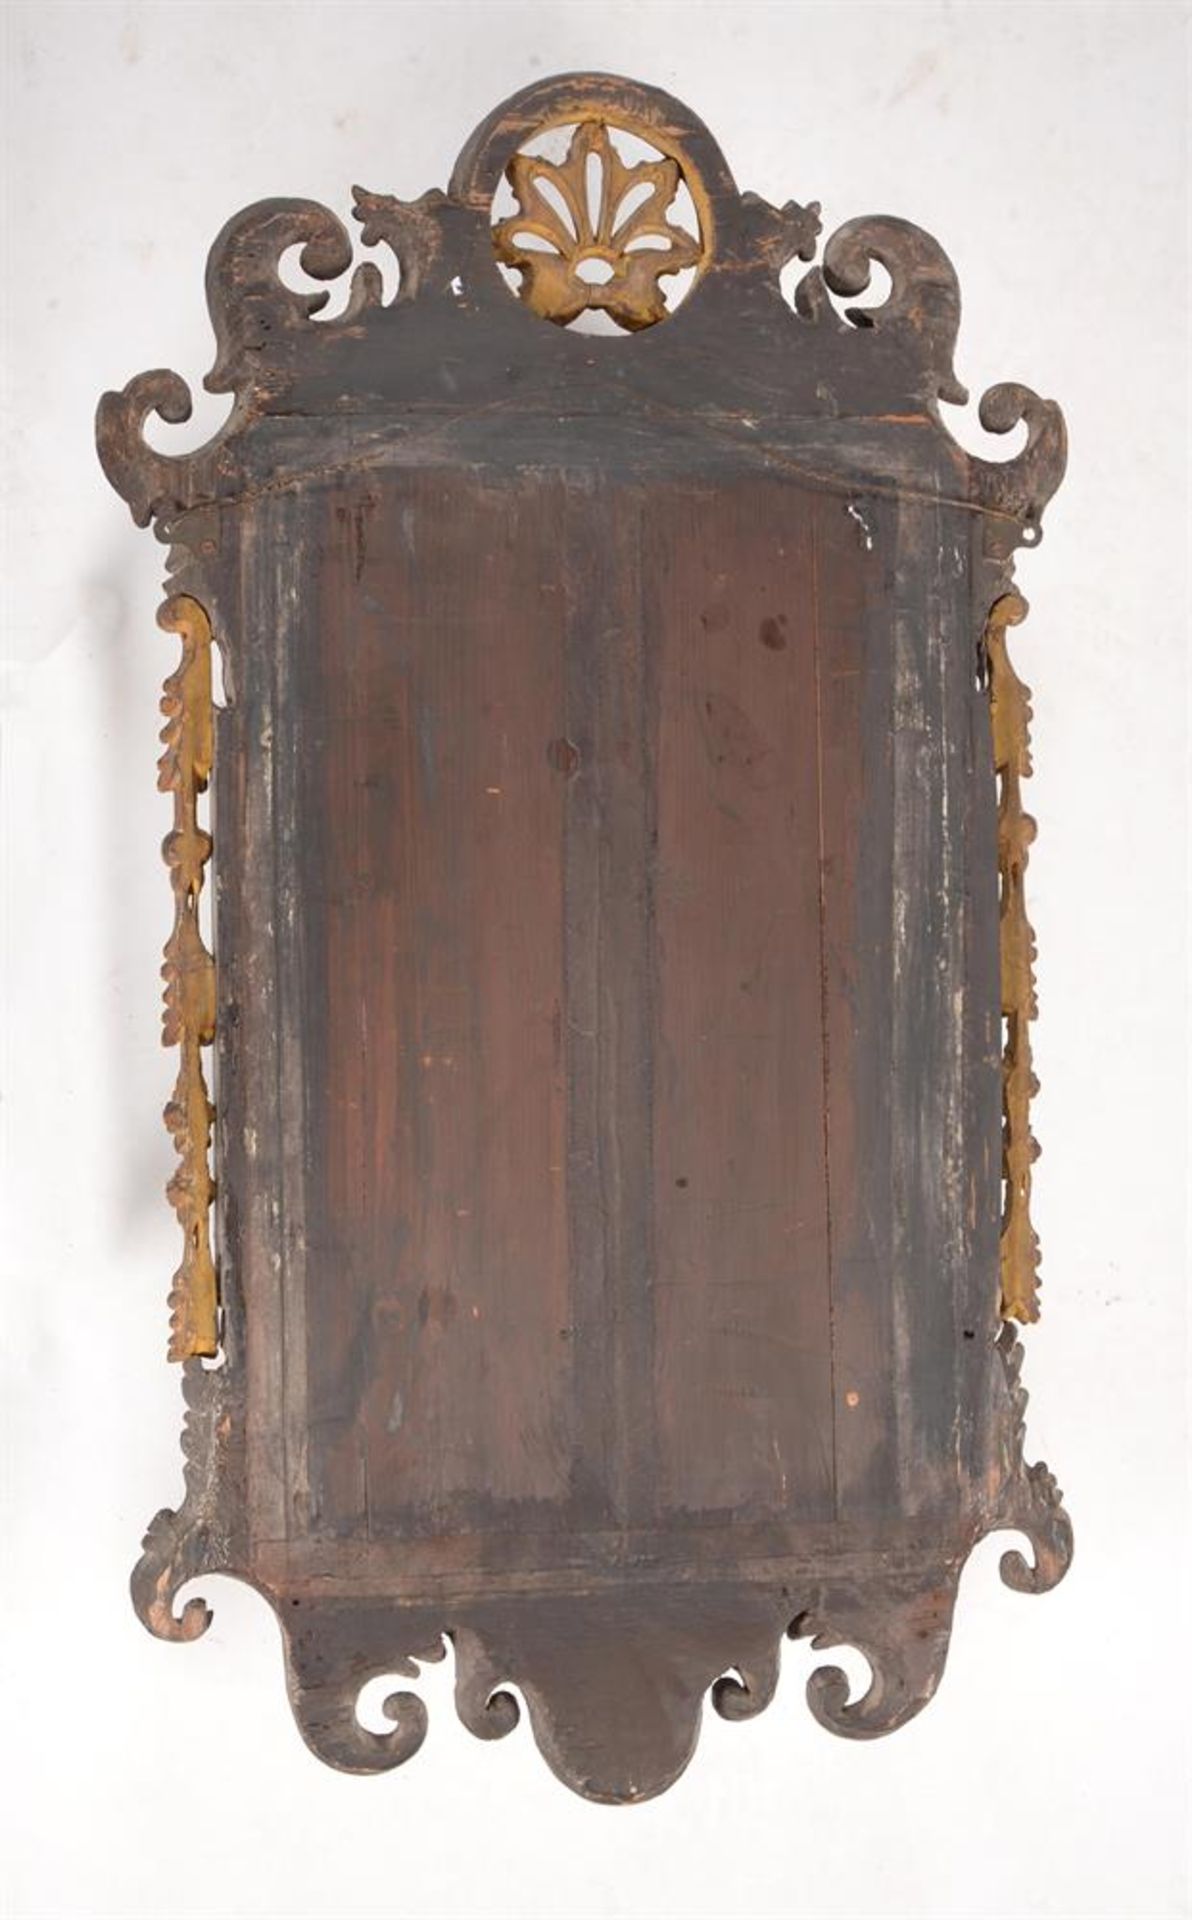 A GEORGE III MAHOGANY AND PARCEL GILT MIRROR, CIRCA 1780 - Image 3 of 3